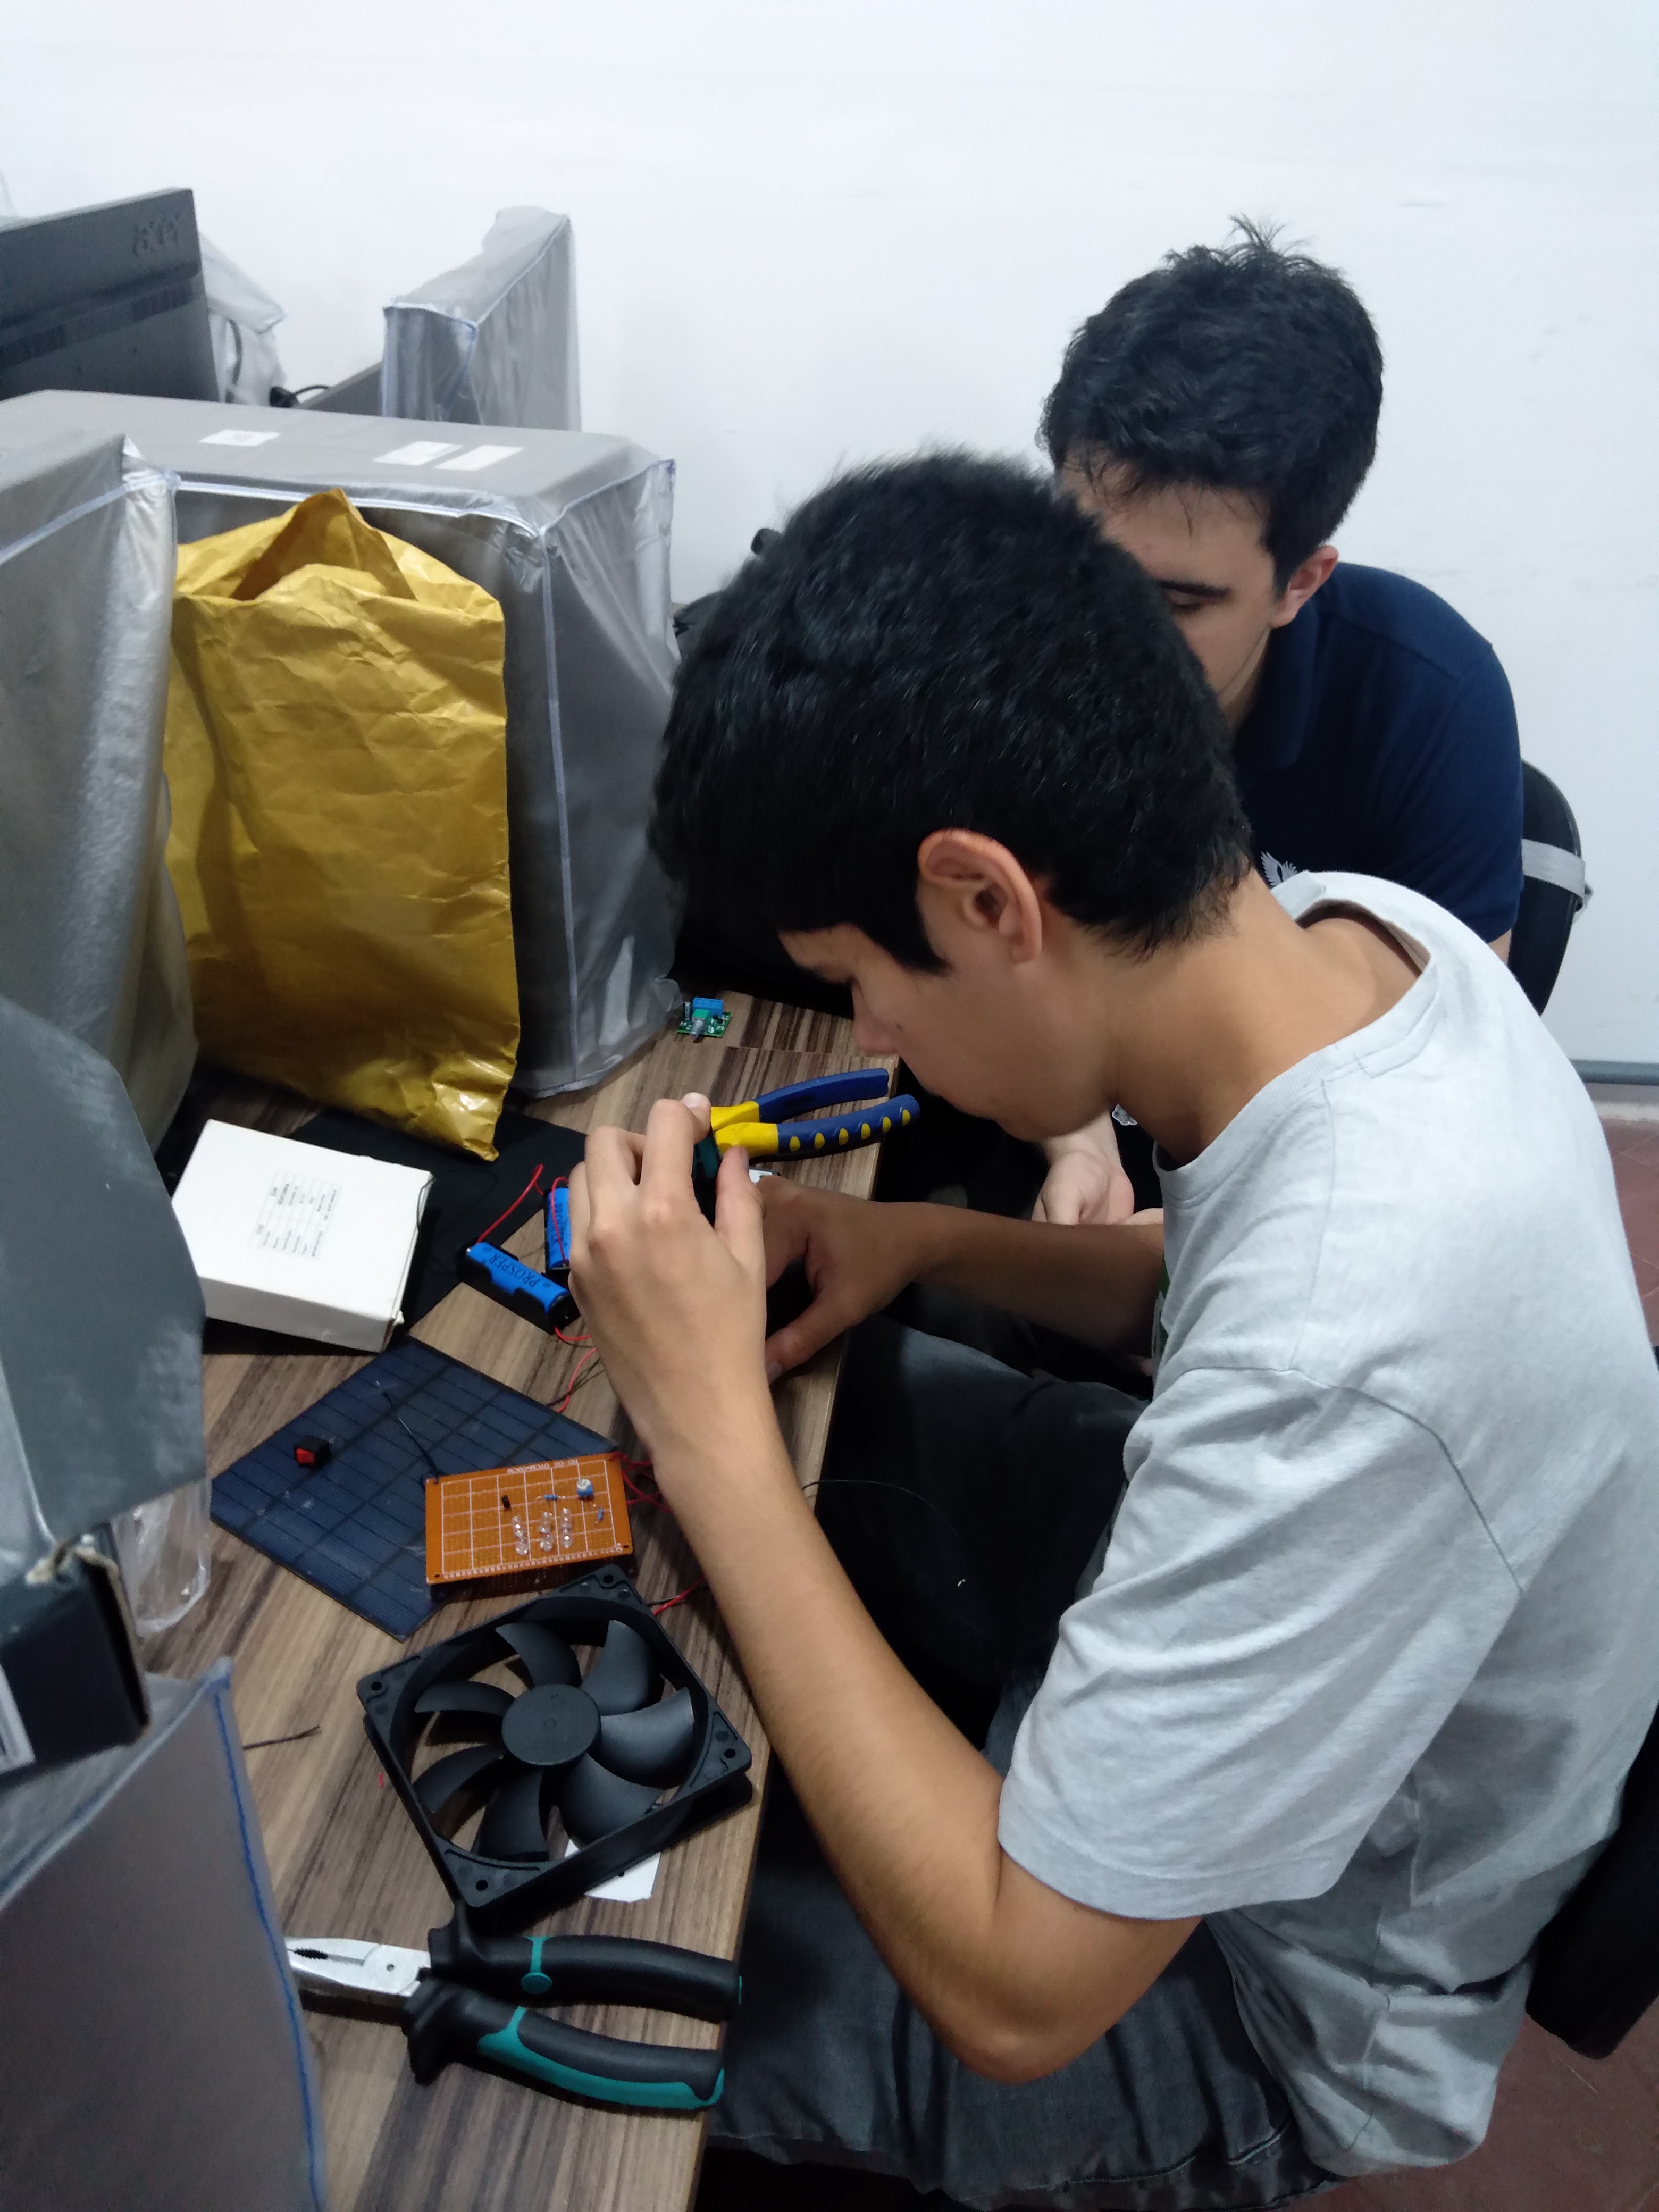 The Taiwan-Paraguay Tech students are assembling the solar-powered mosquito lamps themselves.